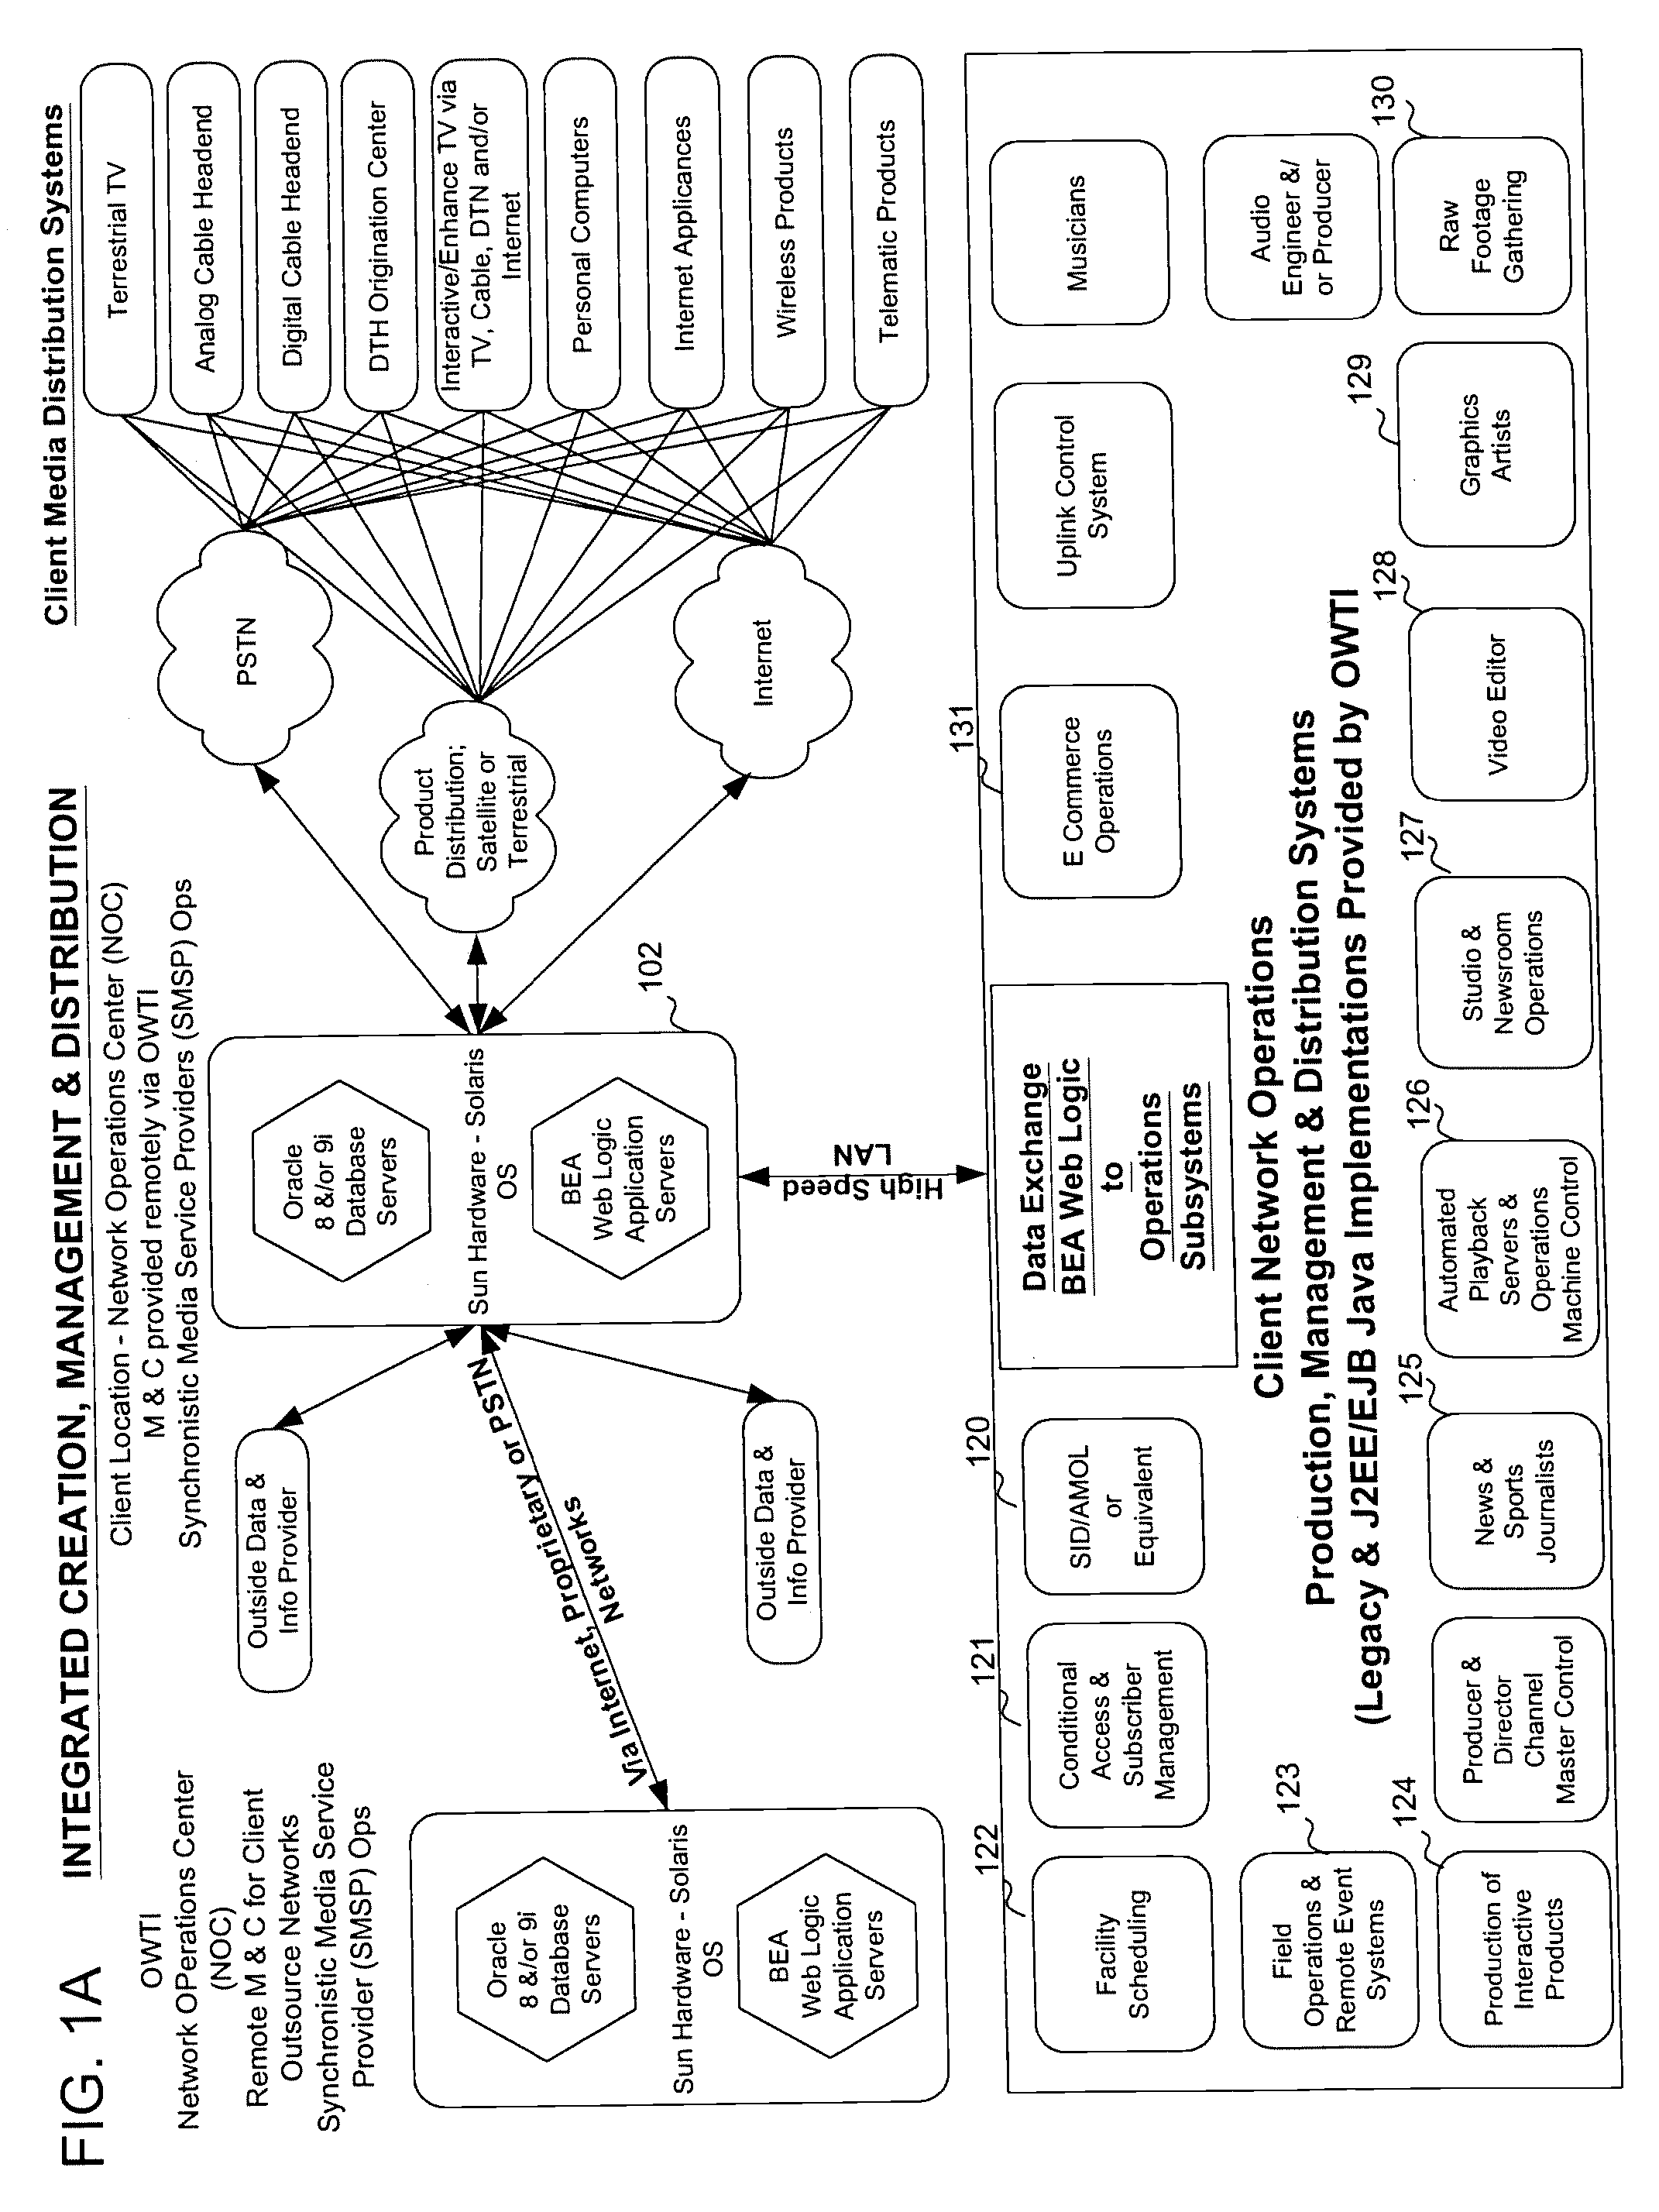 System and method for collaborative, peer-to-peer creation, management & synchronous, multi-platform distribution of profile-specified media objects